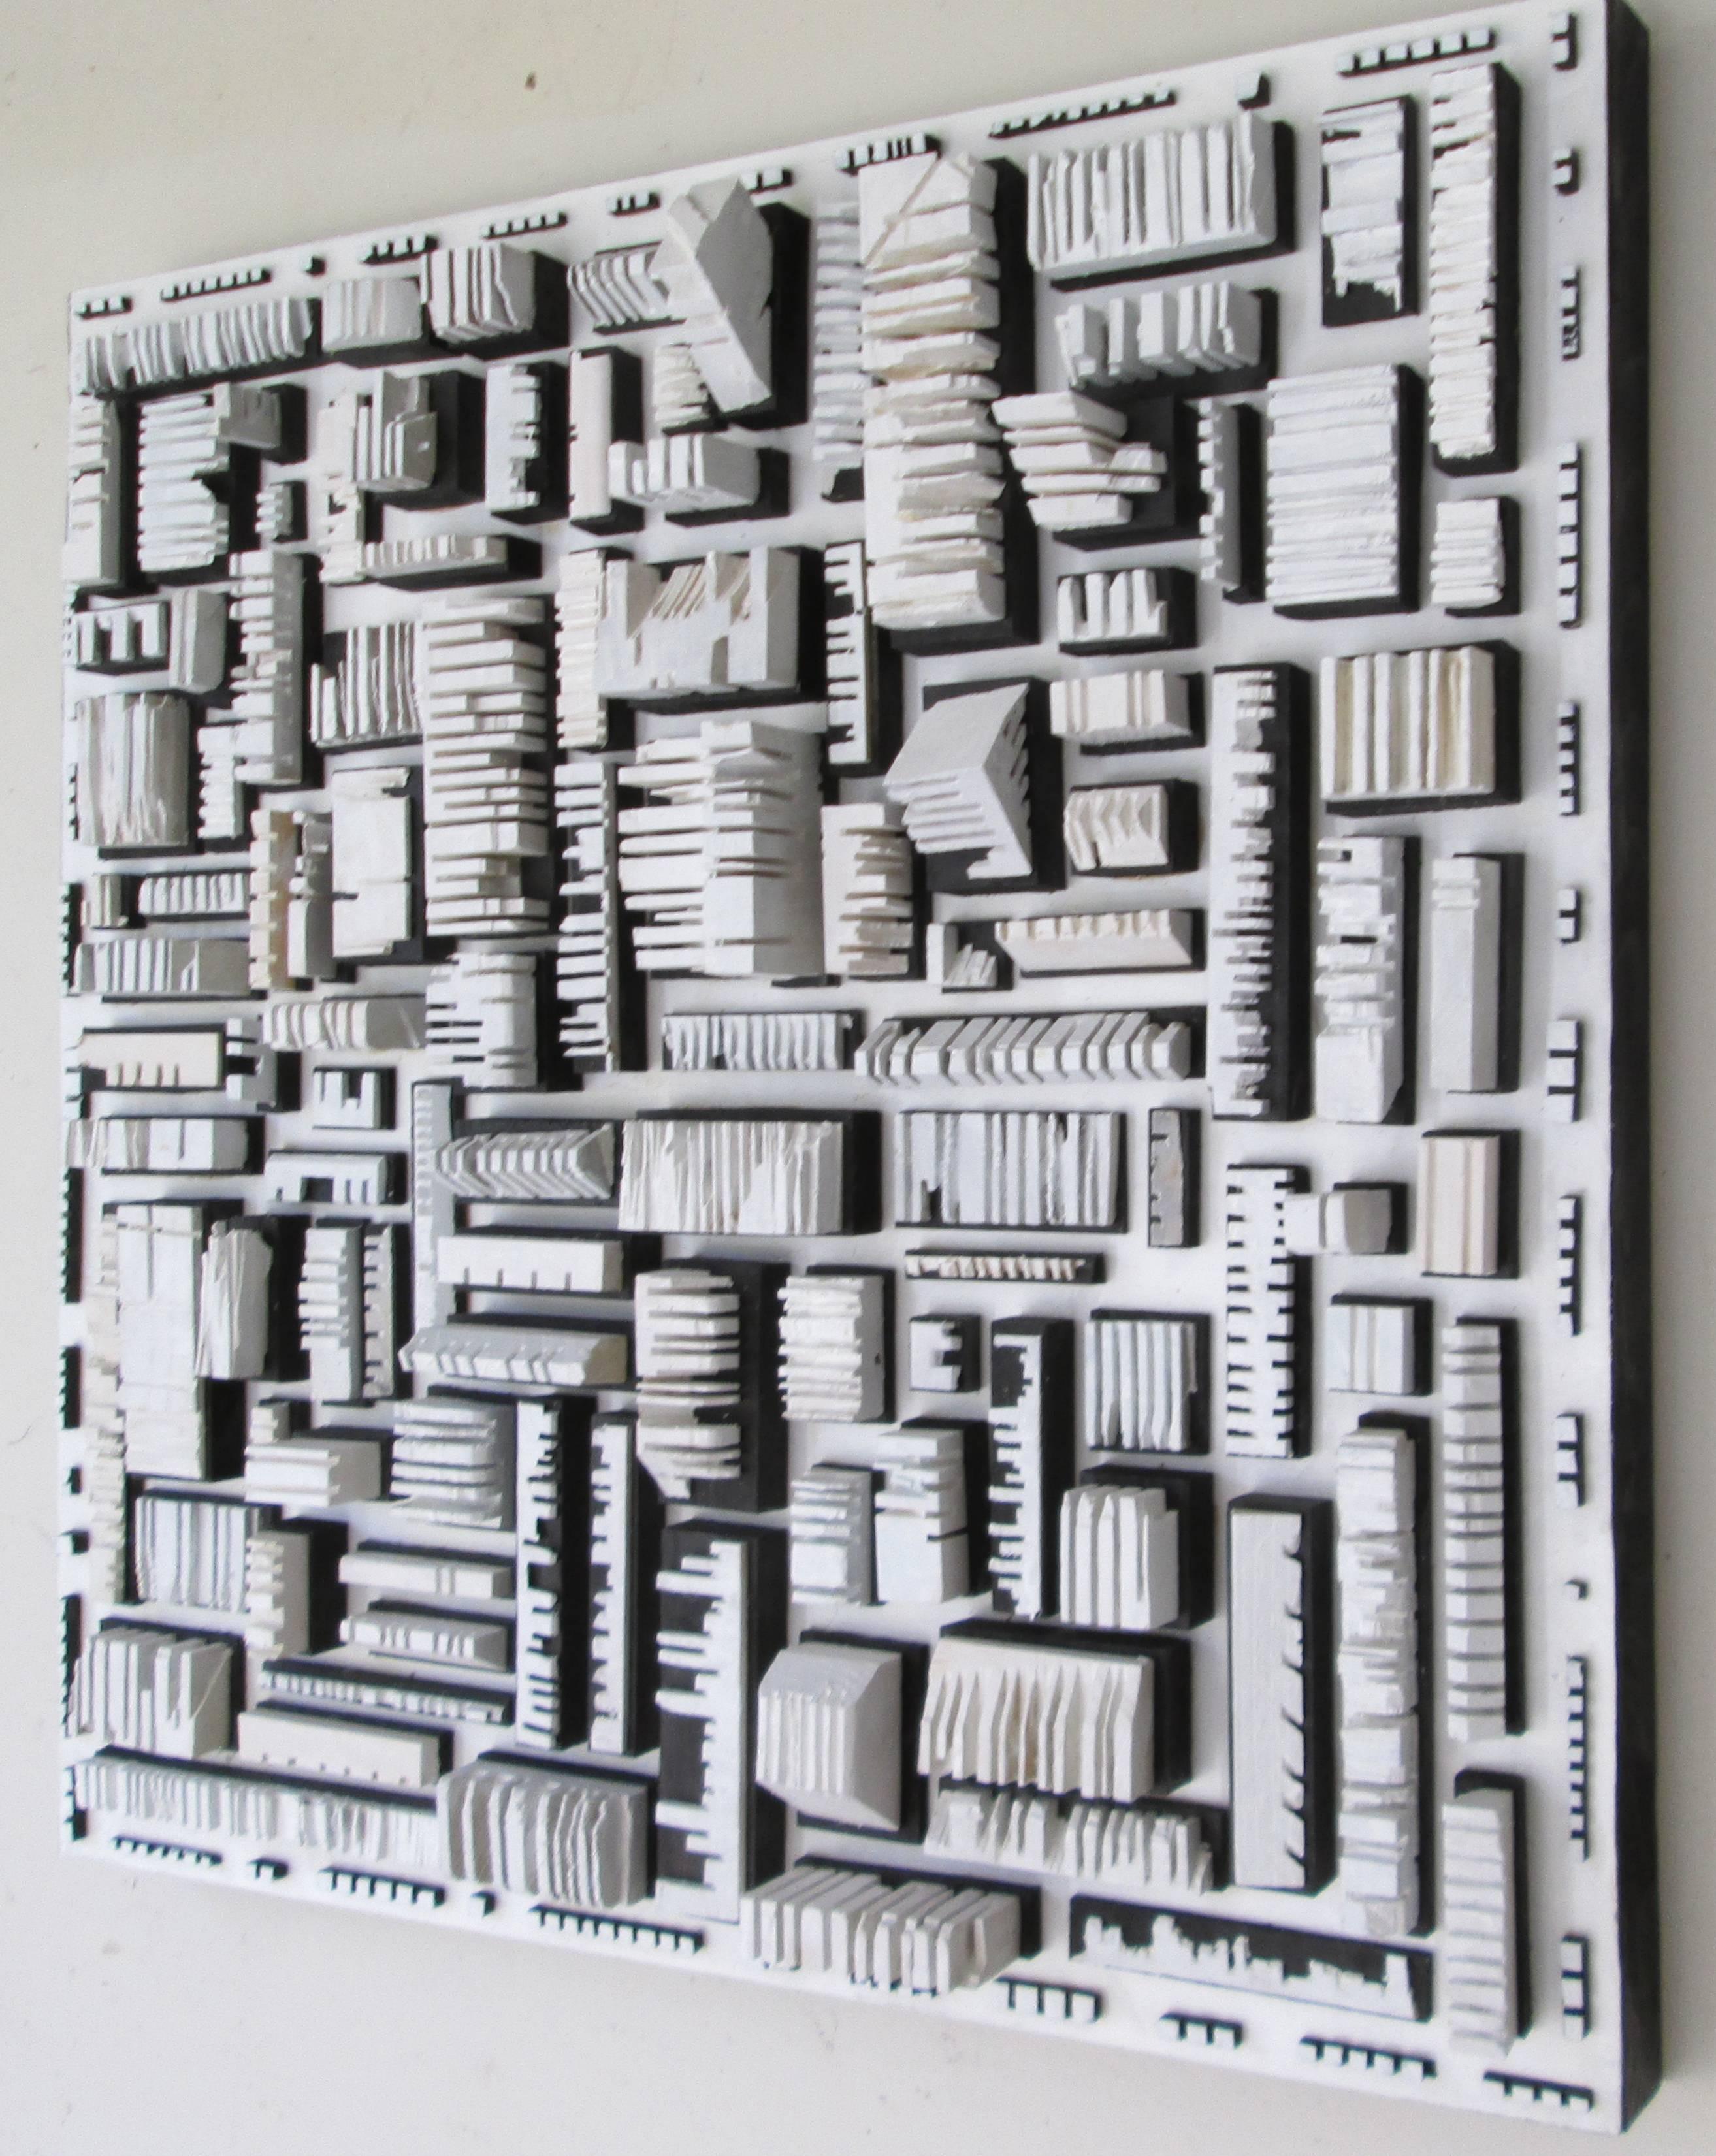 Bits and Pieces (Abstract Aerial View of Urban Landscape in Black and White) - Sculpture by Stephen Walling